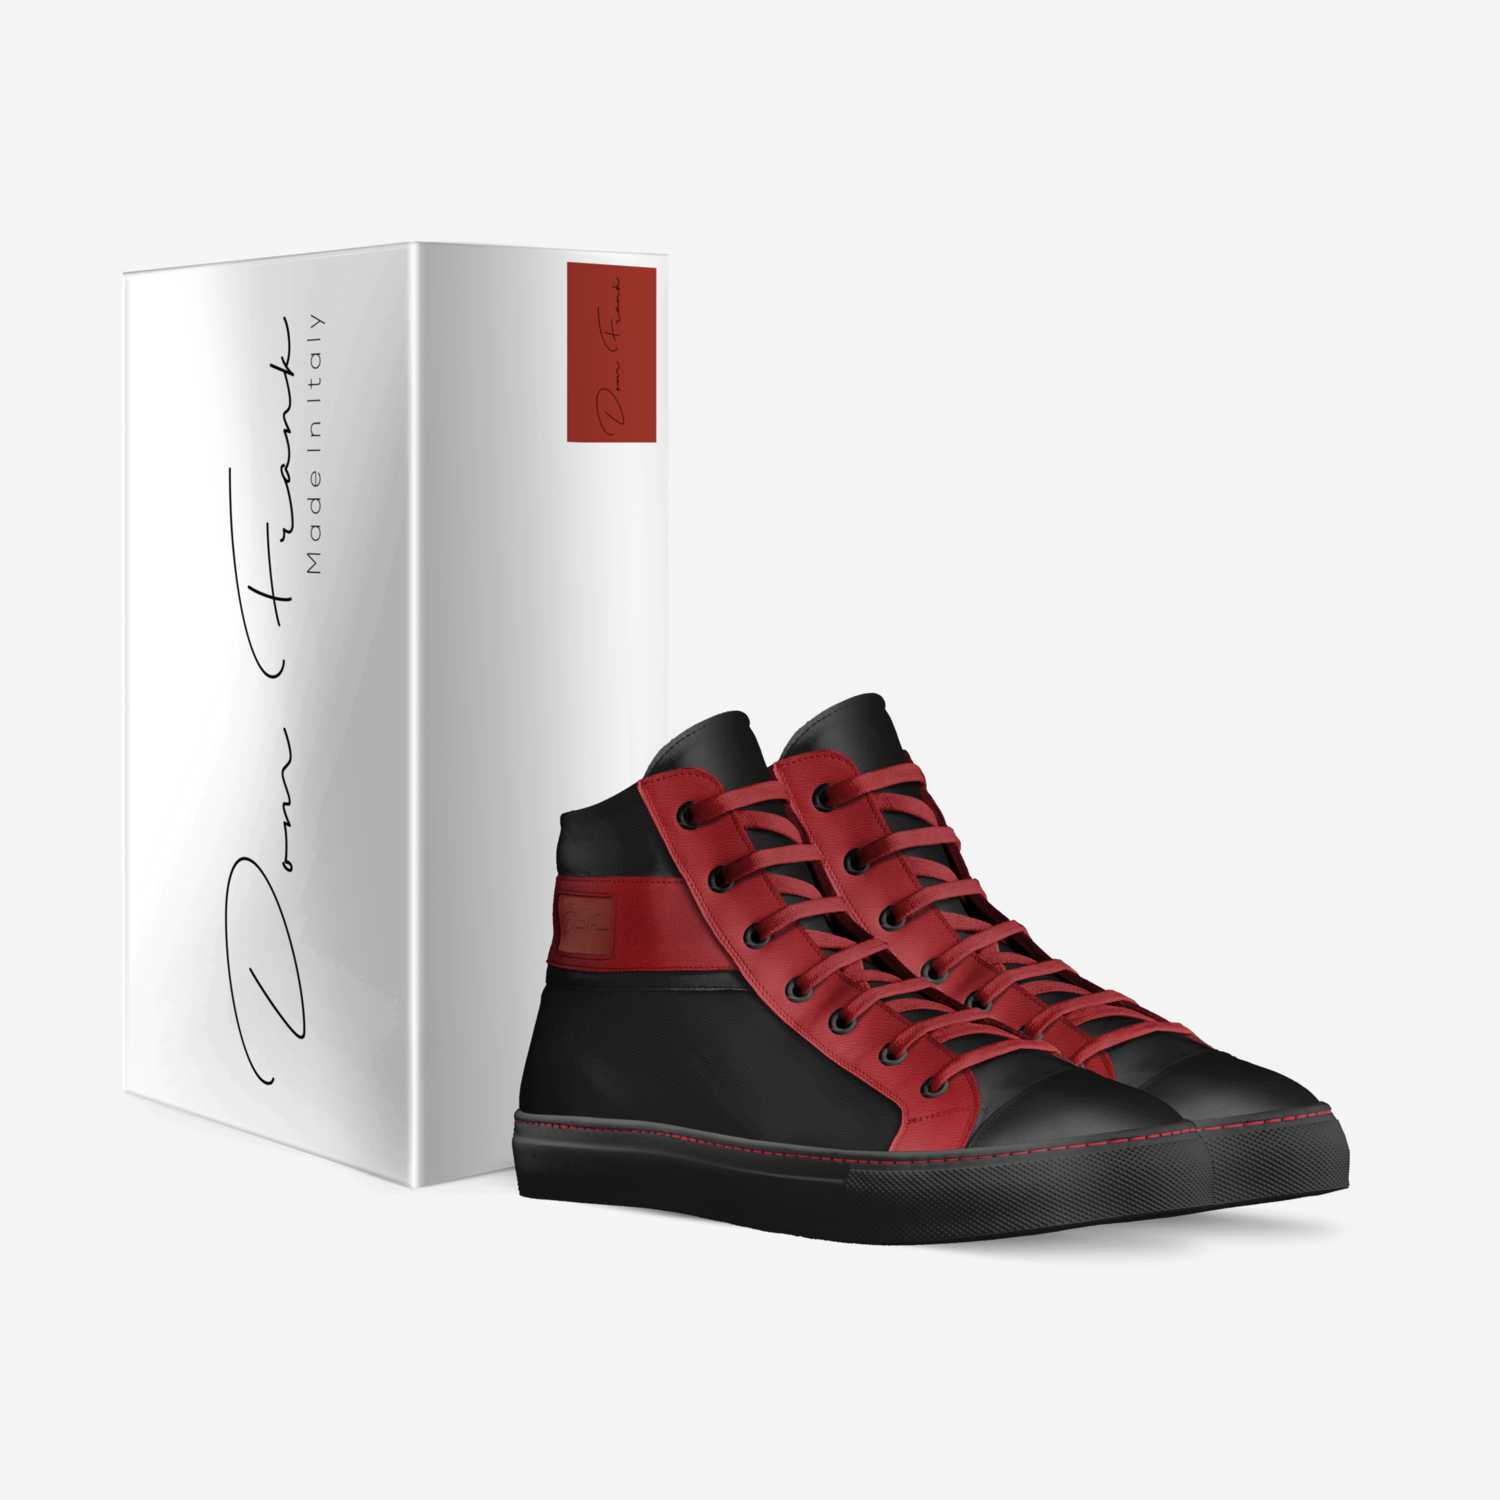 THE DOM custom made in Italy shoes by Dominic Franklin | Box view